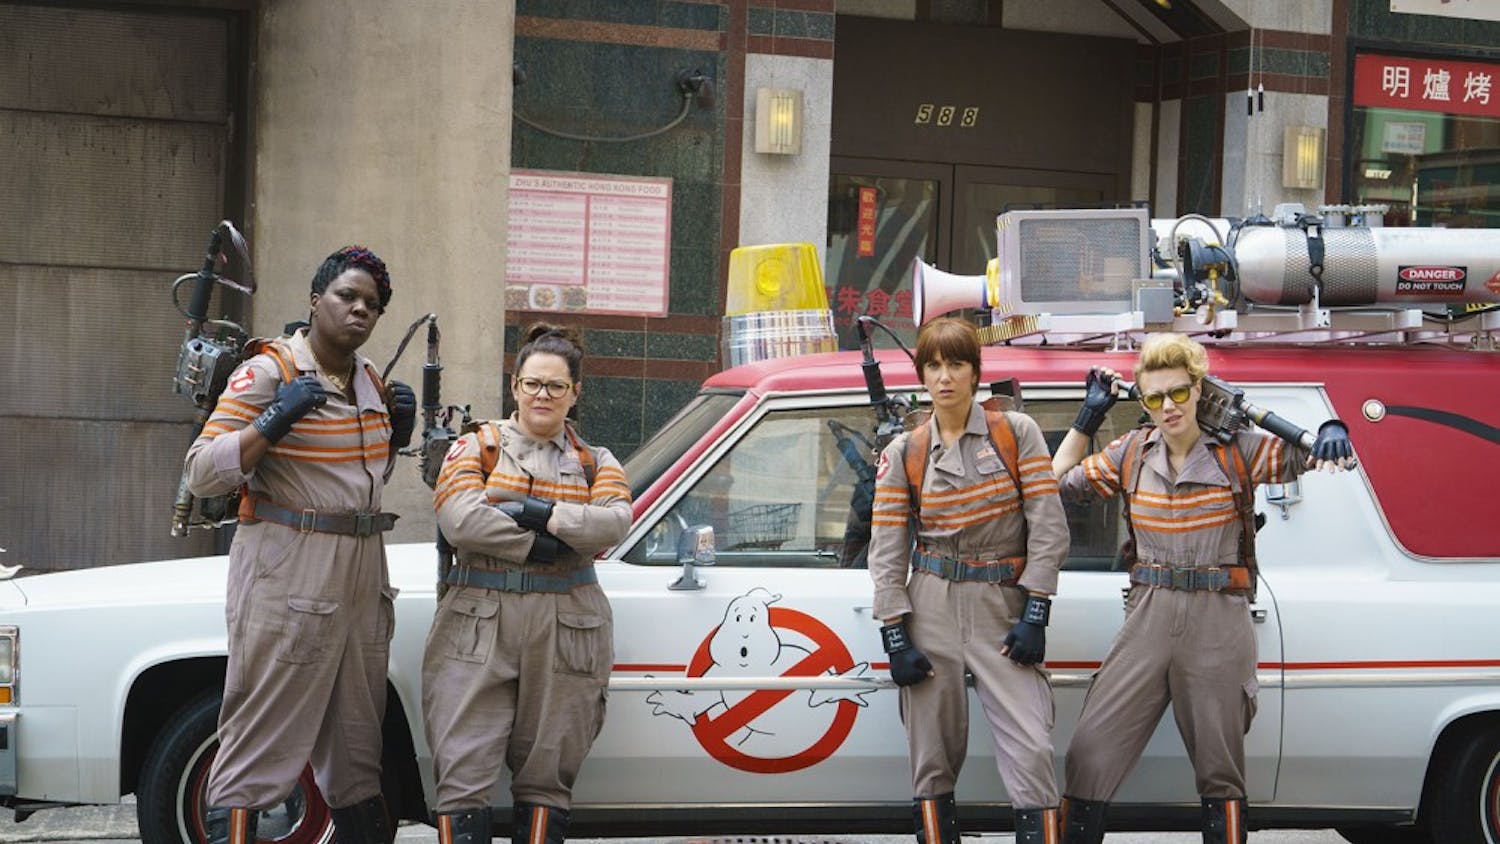 The women of the "Ghostbusters" reboot had excellent chemistry, proving that comedy by women can be done excellently and with ingenuity.&nbsp;